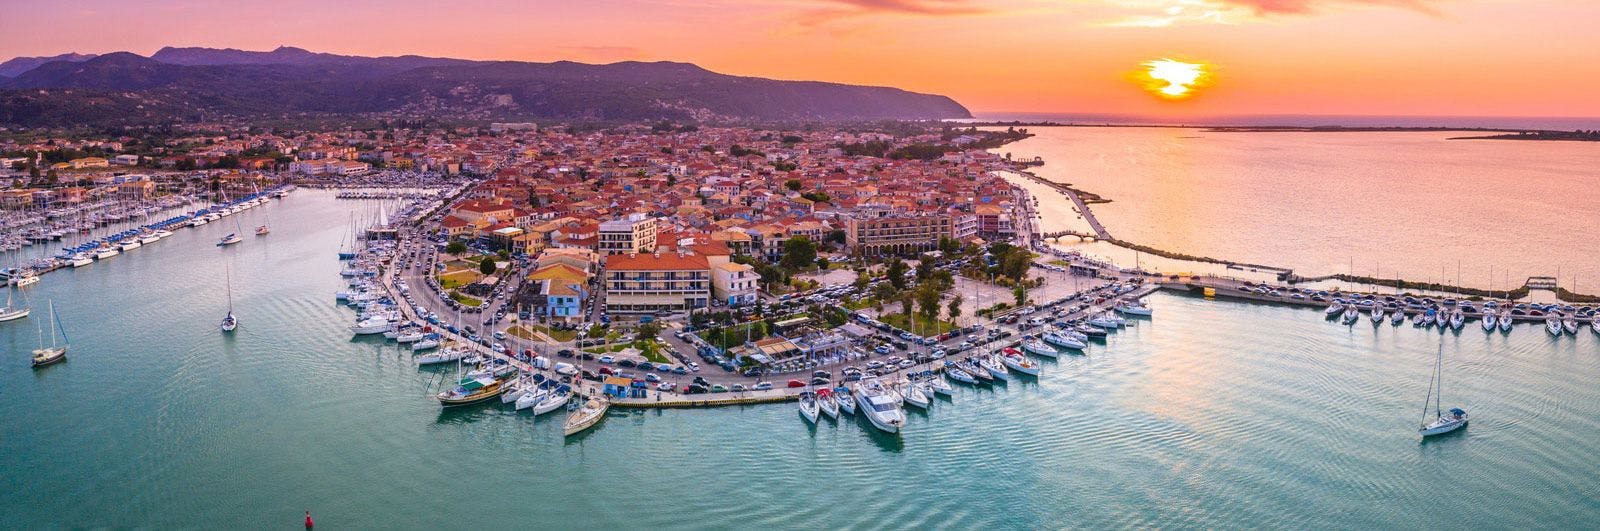 View of Lefkada town at sunset with sailboats in the harbor